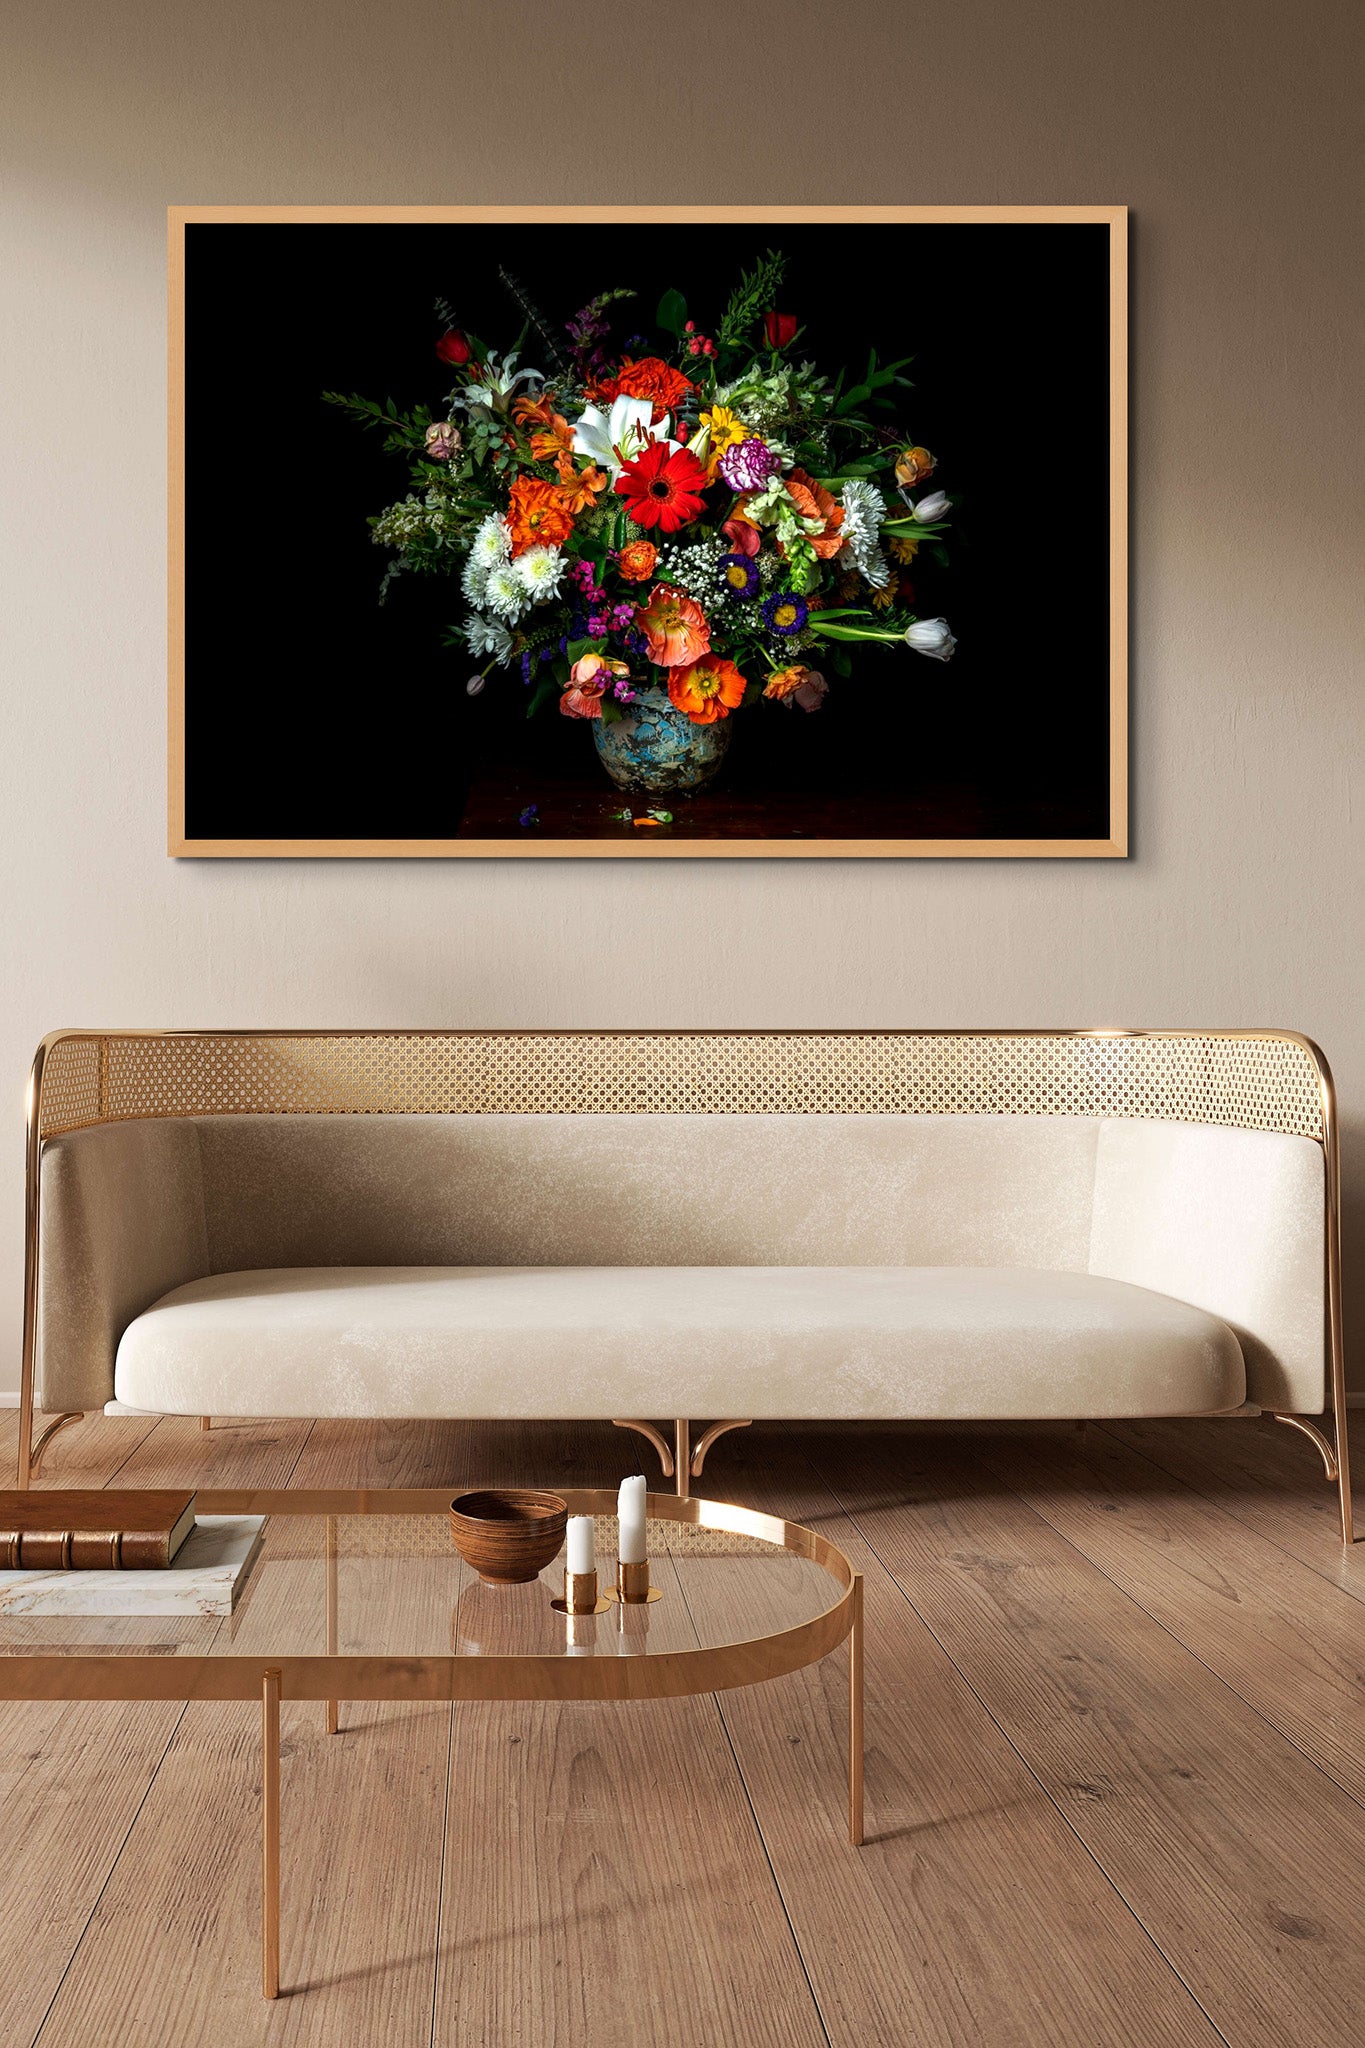 A picture hanging on the wall of a living room. There is a sofa and table. The picture is a metal print from Dreaux Fine Art of "A Generous Gift." "Generous Gift" is a photograph of a bouquet of various types of flowers on a black background.